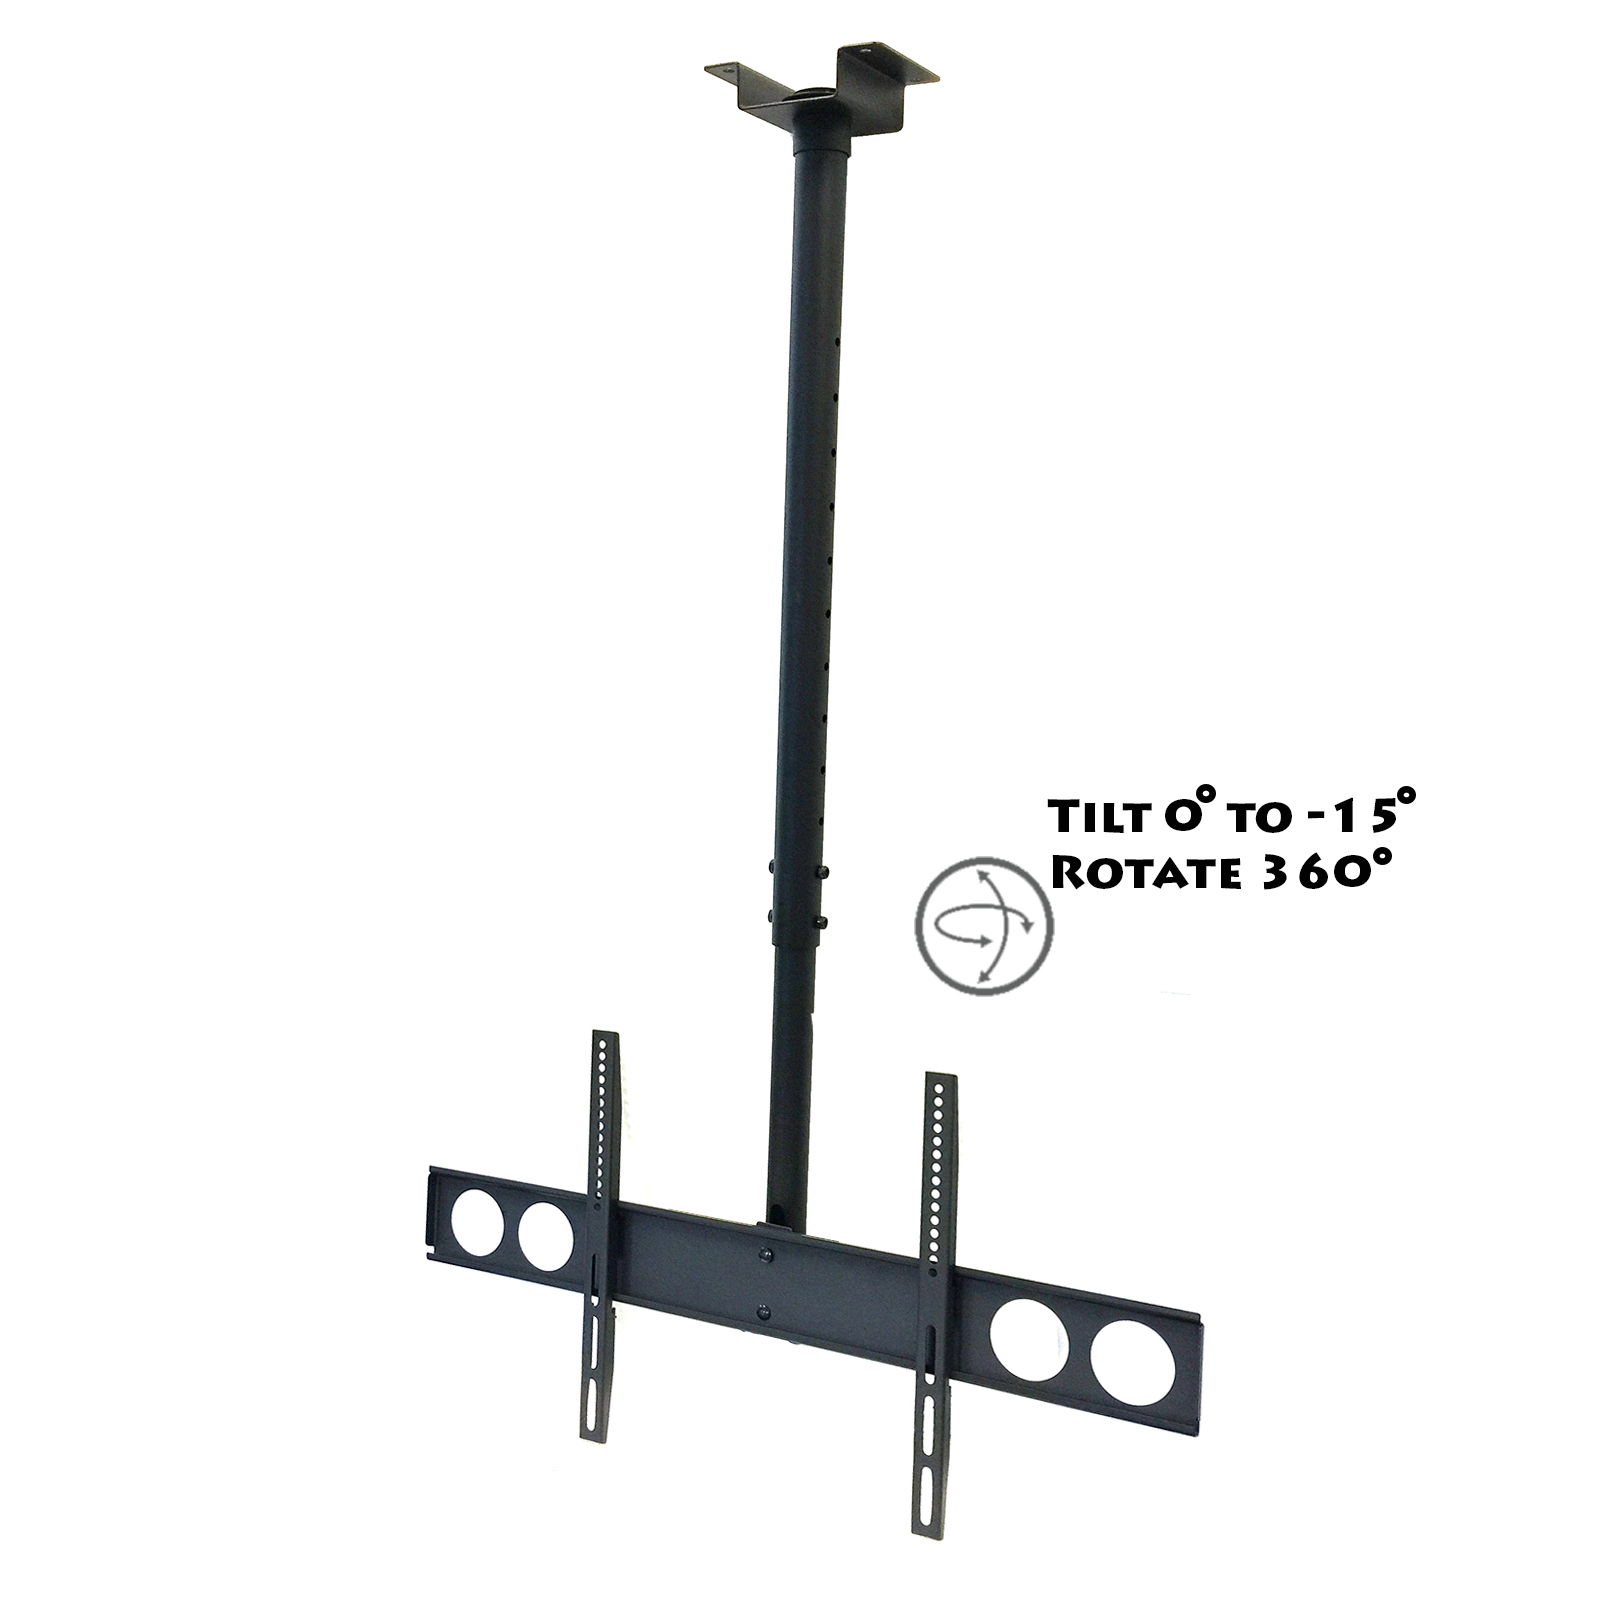 Megamounts 97096987M Heavy Duty Tilting Ceiling Televeision Mount for 37" to 70" LCD, LED and Plasma Televisions